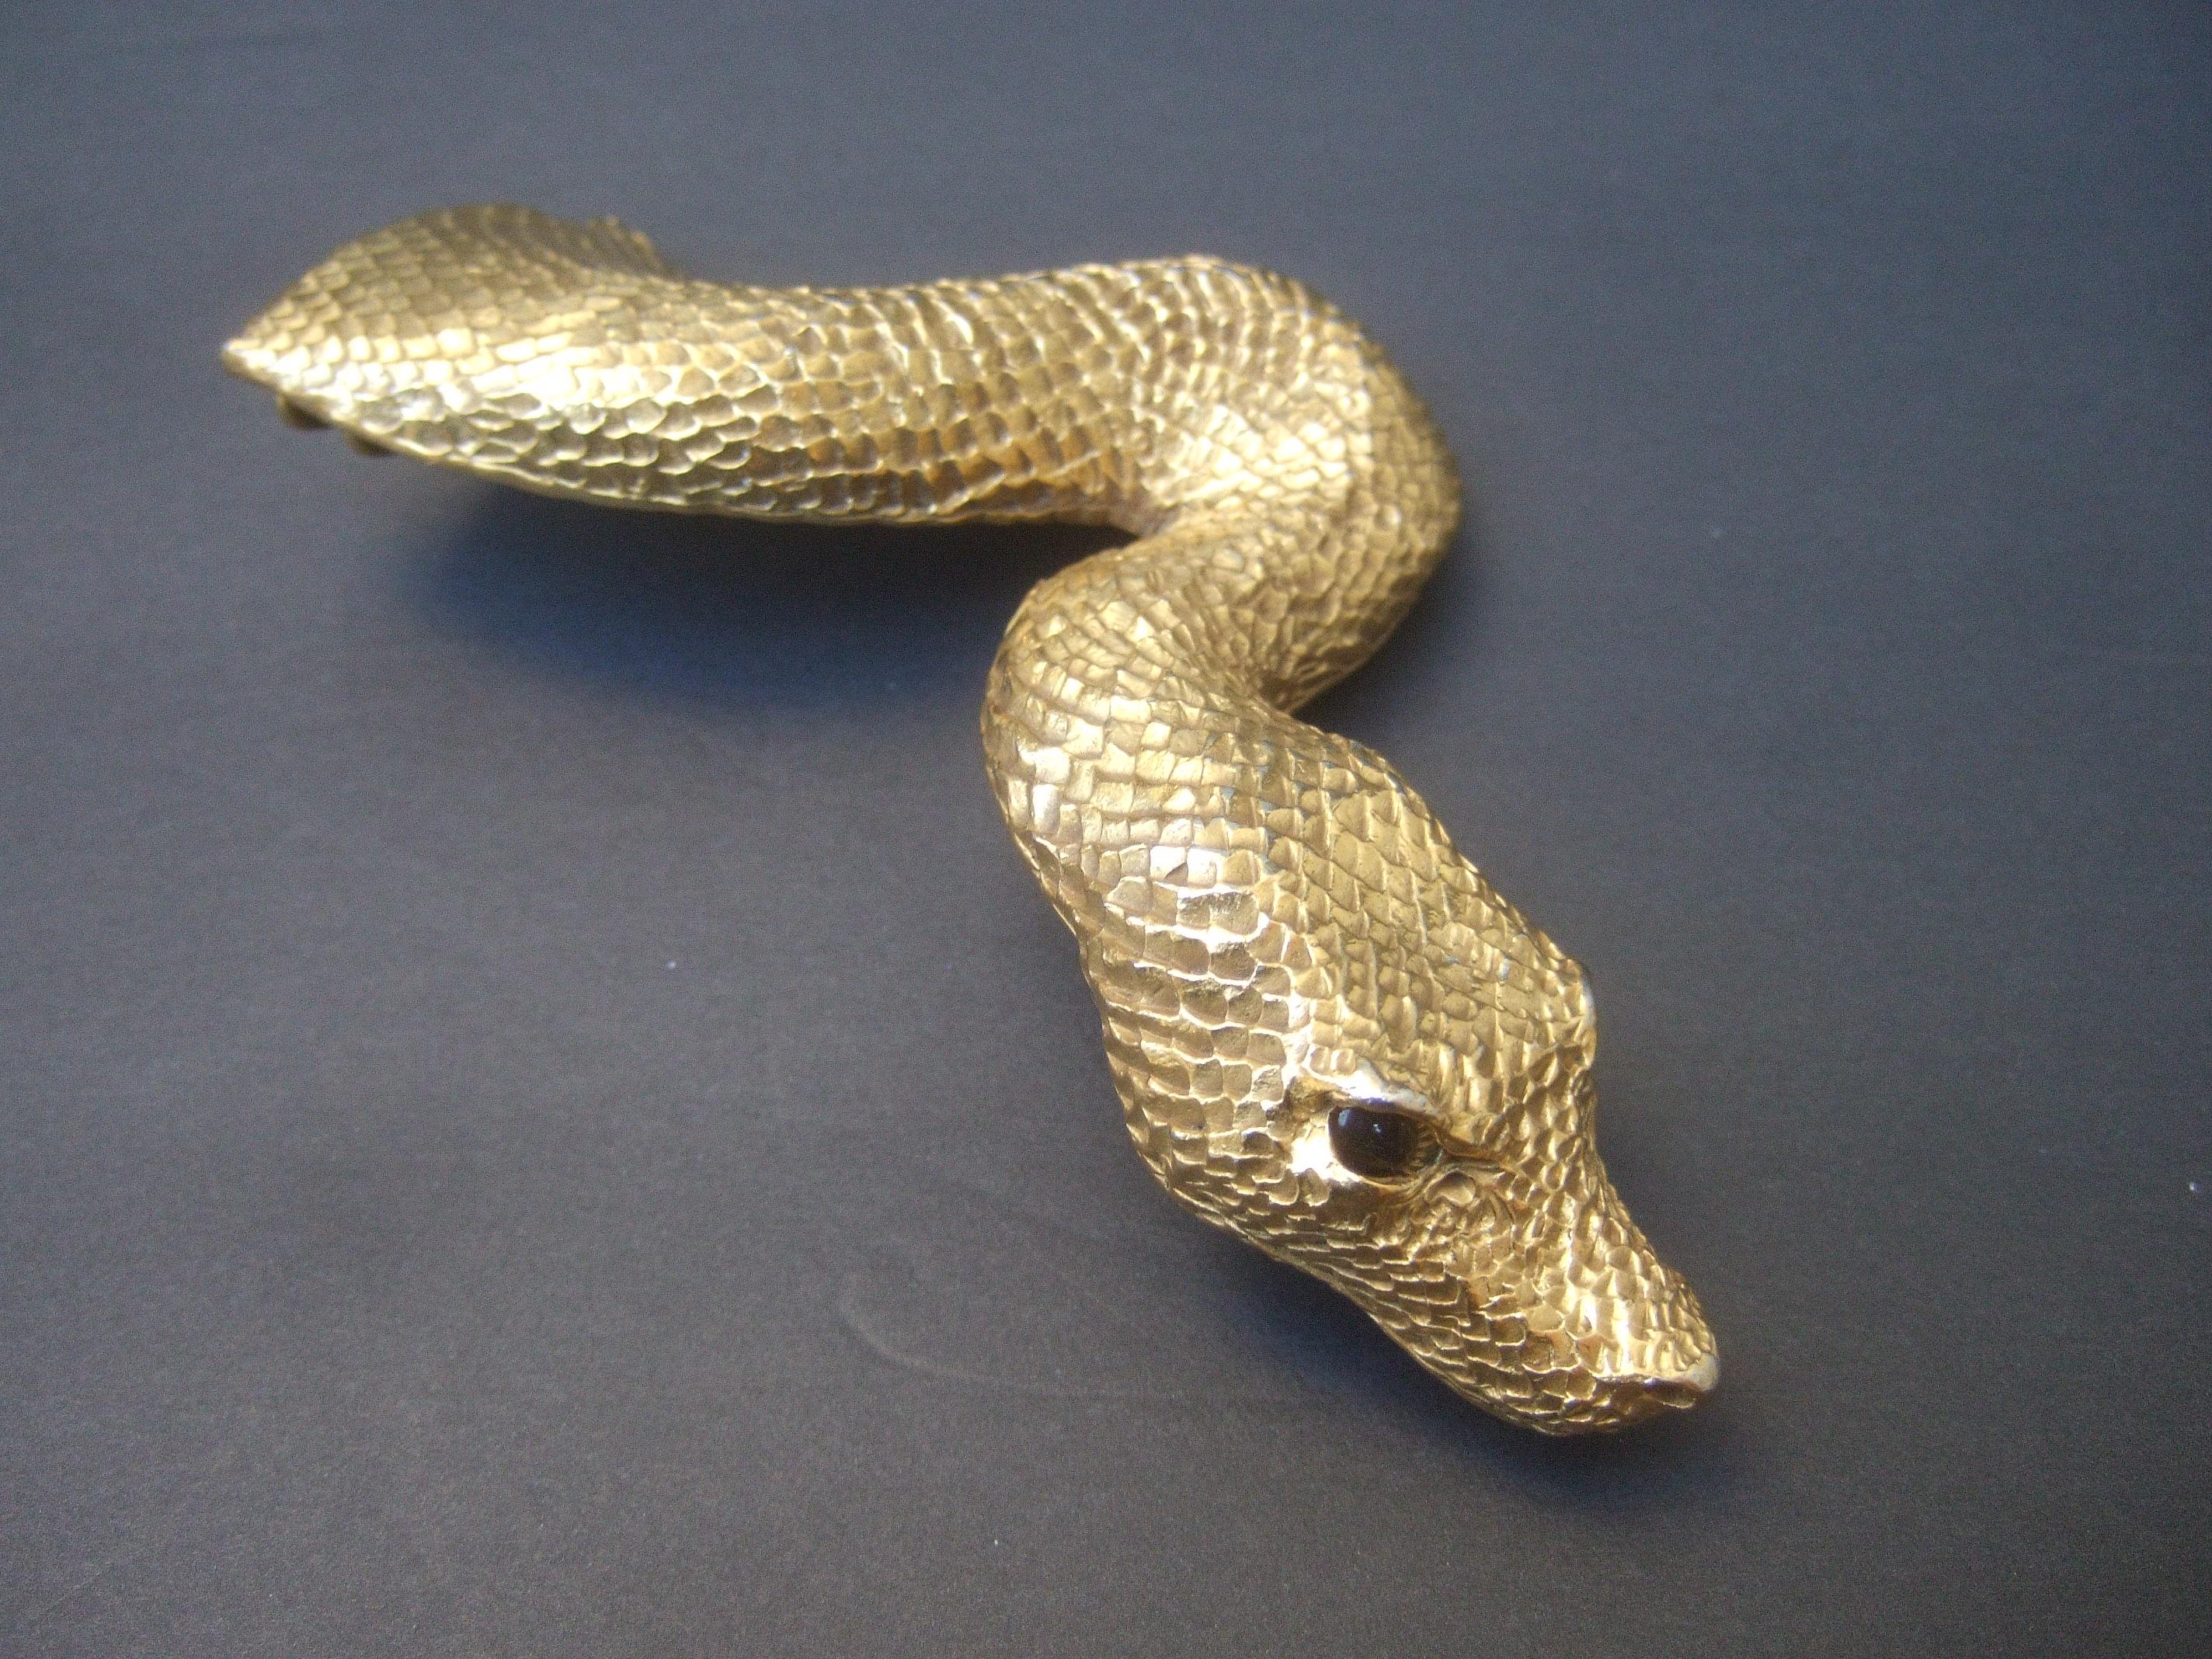 Christopher Ross 24k gold plated serpent belt buckle c 1980
The avant-garde belt buckle is designed in the likeness 
 of a large scale serpent figure

The luminous 24k gold plating has an etched impressed detail that emulates scales. The piercing